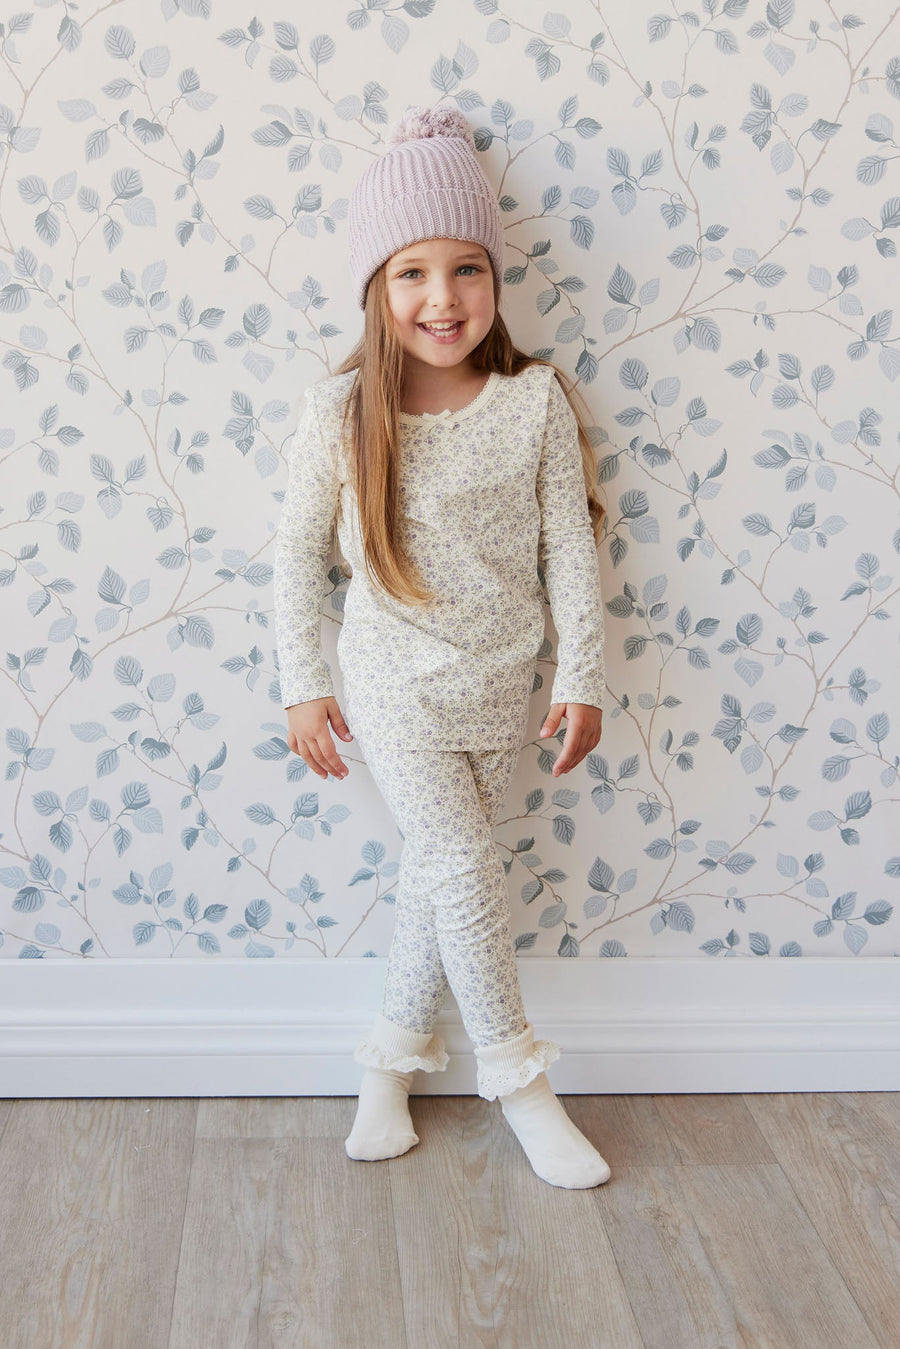 Gymboree - There's no such thing as too many cozy & cute leggings